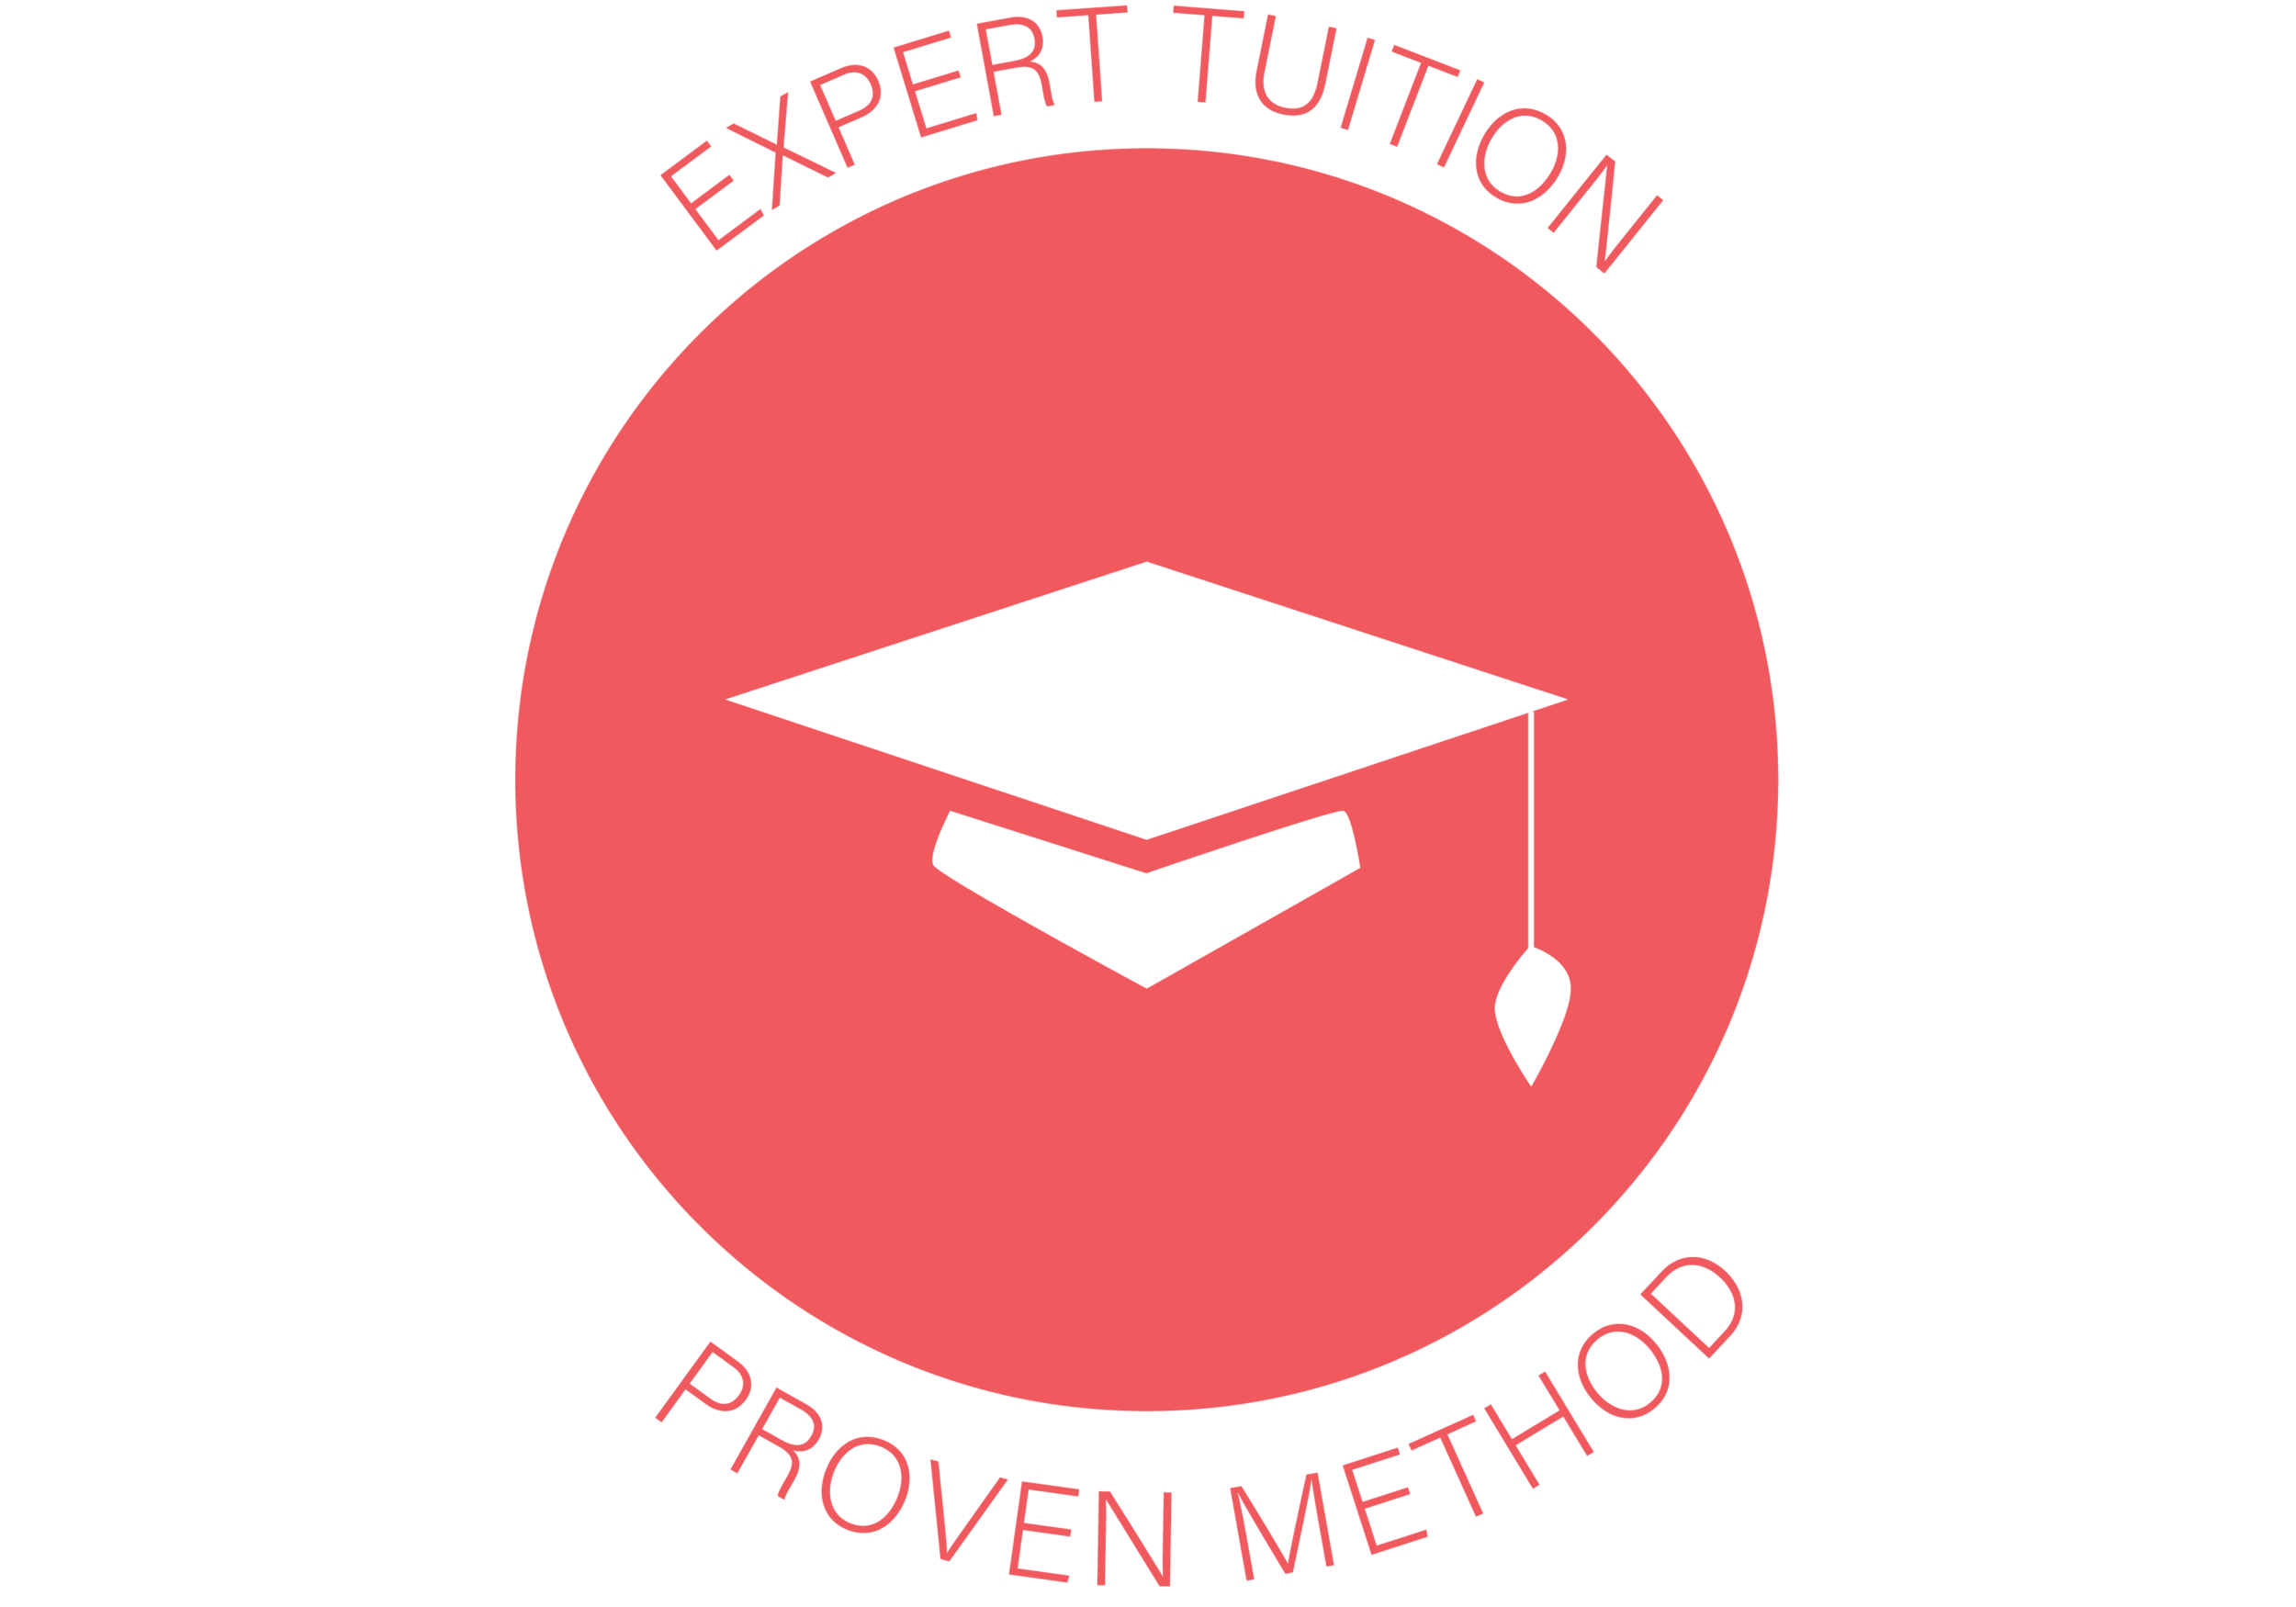 stamp_bond-street-languages_mortarboard_Expert tuition-01.png